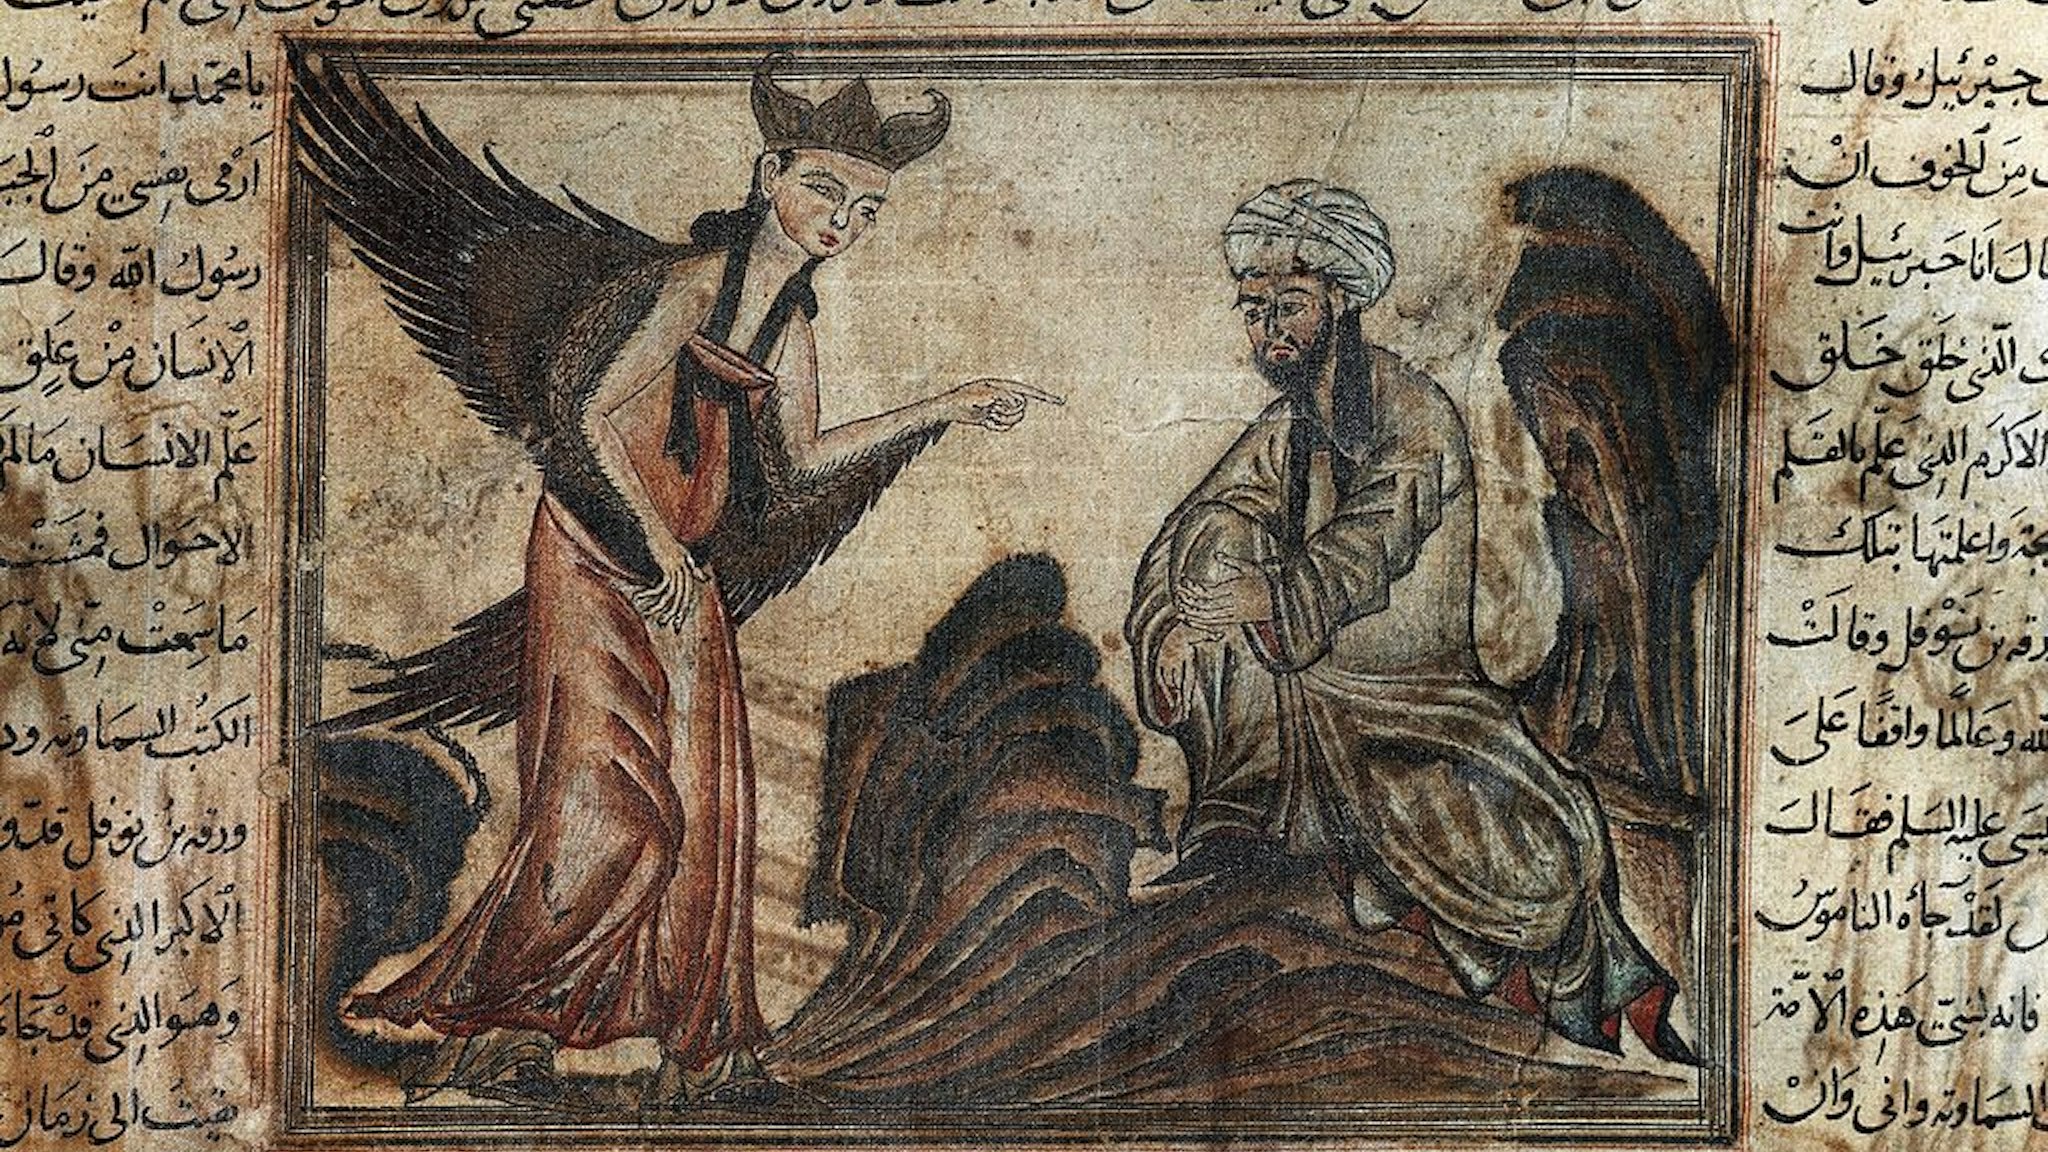 UNSPECIFIED - CIRCA 2003: Muhammad and the Archangel Gabriel, miniature from miniature from Jami' al-Tavarikh (The Universal History or Compendium of Chronicles), by Rashid Al-Din (1247-1318), manuscript or 20, folio 45, verso, vellum, ca 1307. 14th century. Edinburgh, University Library (Photo by DeAgostini/Getty Images)